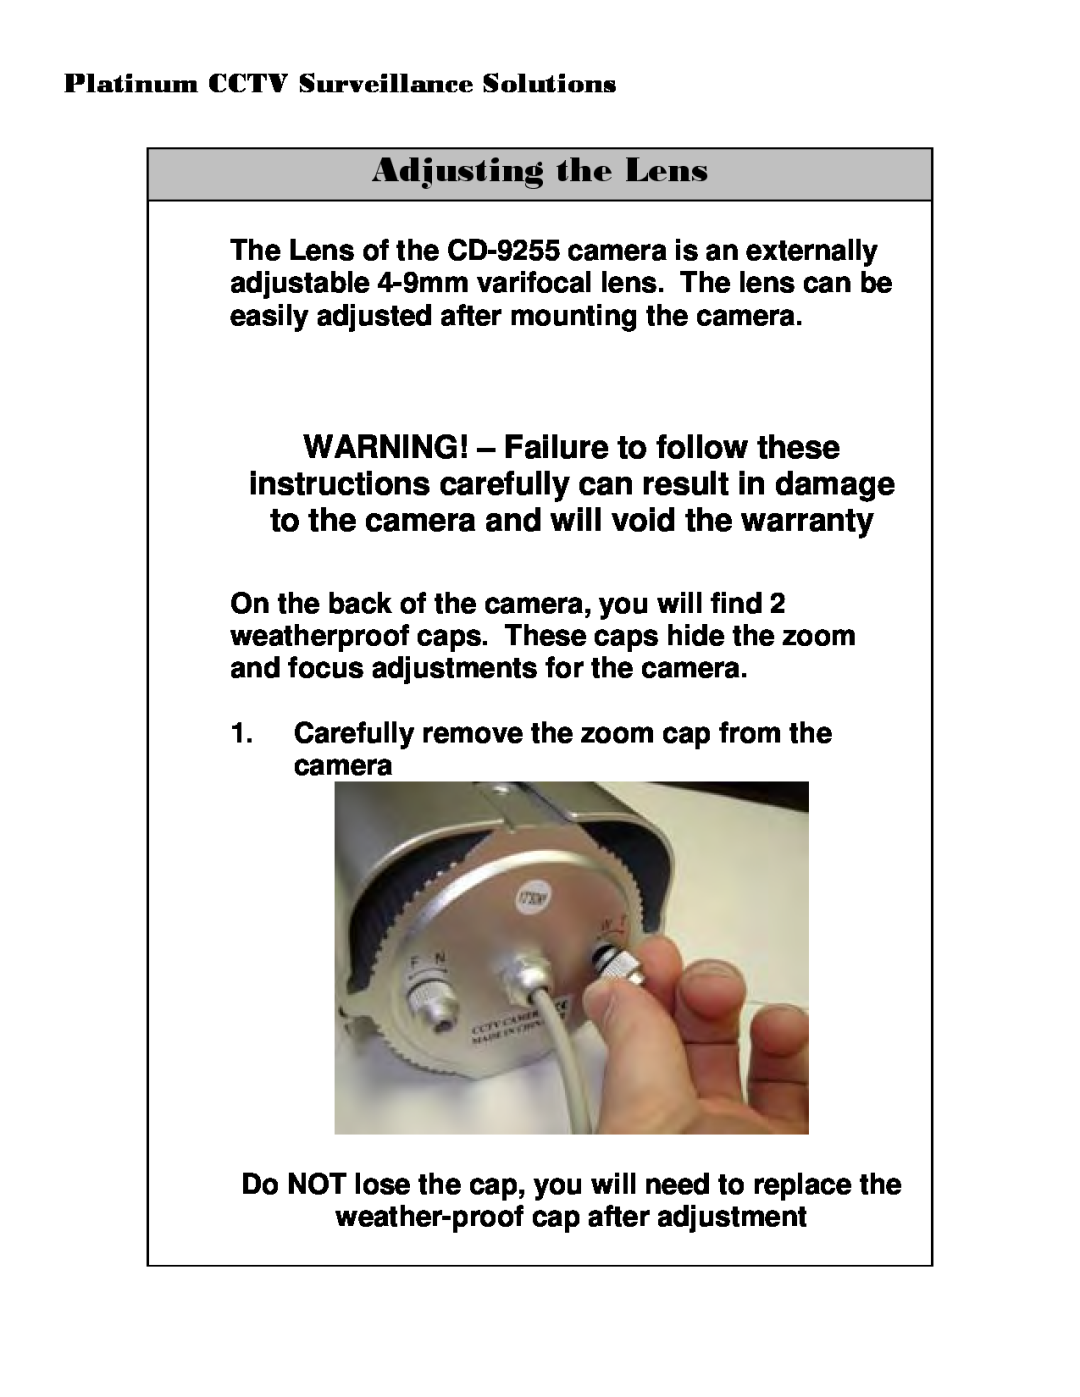 Sony CD-9255 Adjusting the Lens, WARNING! - Failure to follow these, Platinum CCTV Surveillance Solutions 